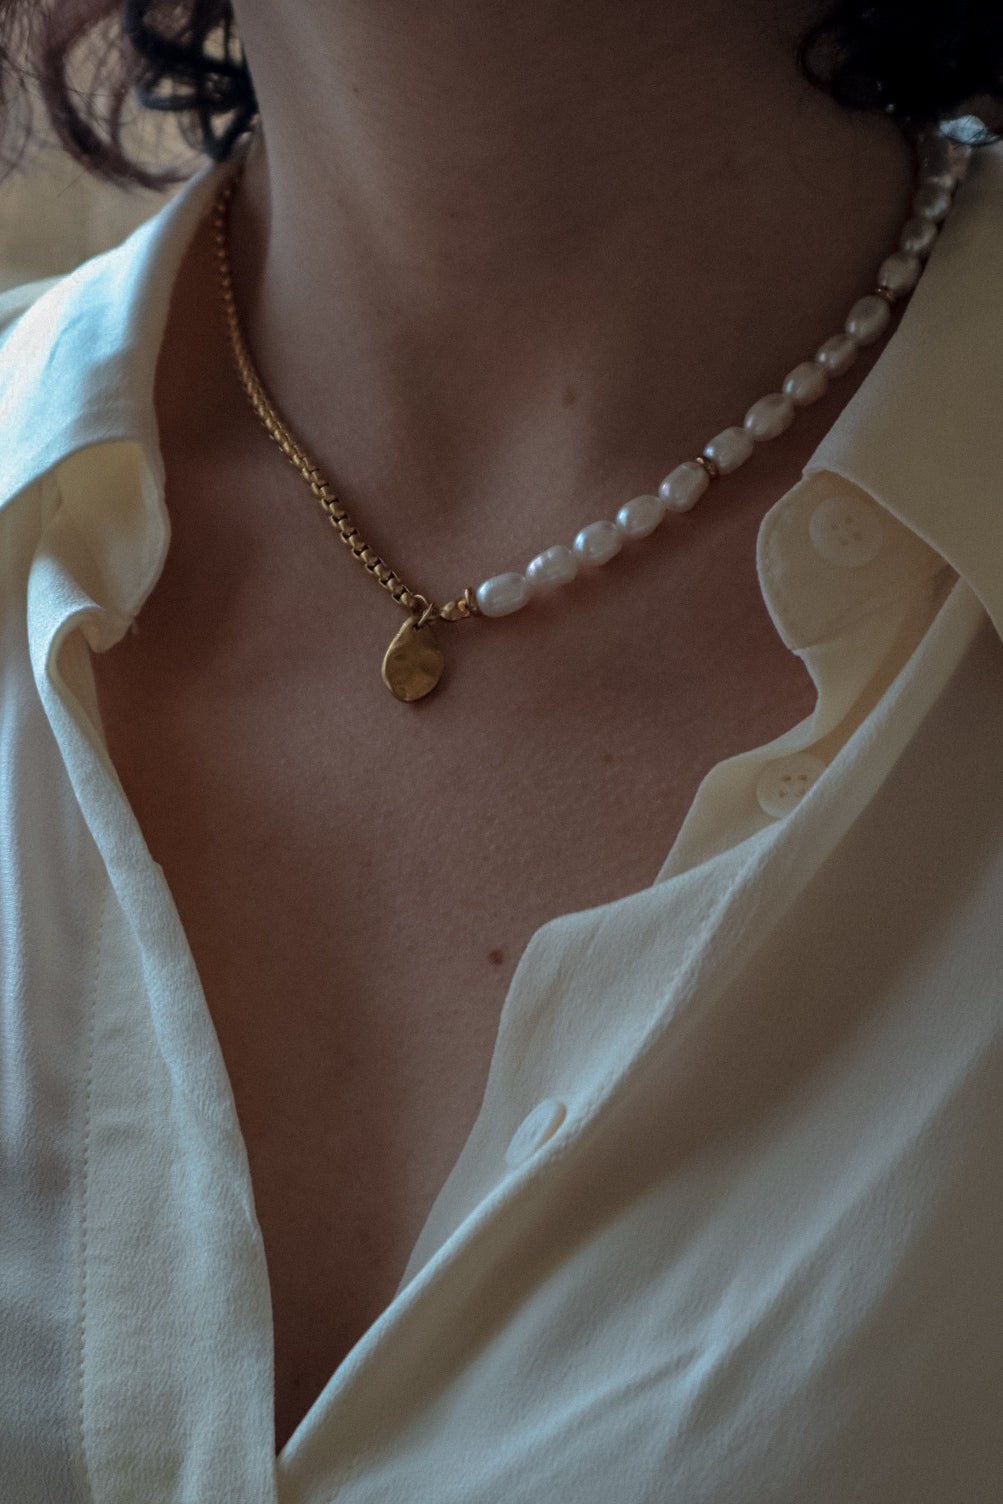 PERLA Chain and Pearl Charm Necklace Gold